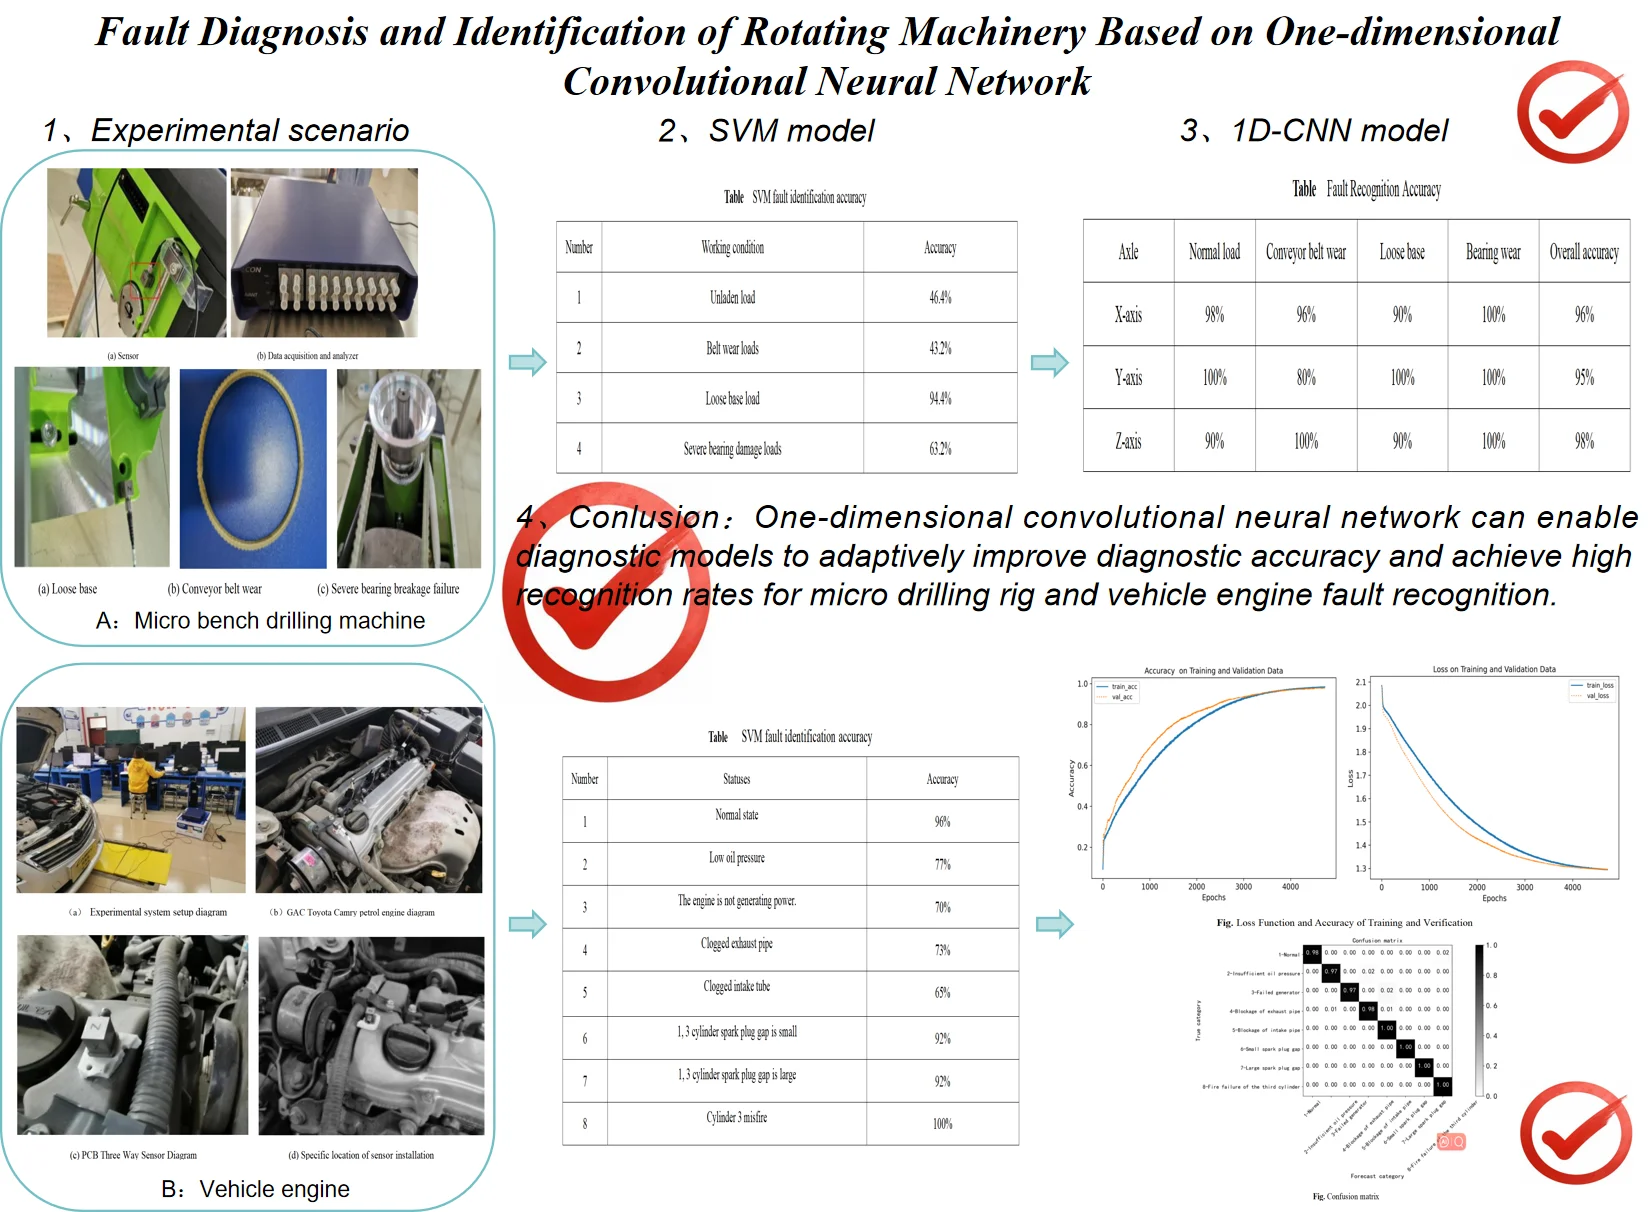 Fault diagnosis and identification of rotating machinery based on one-dimensional convolutional neural network